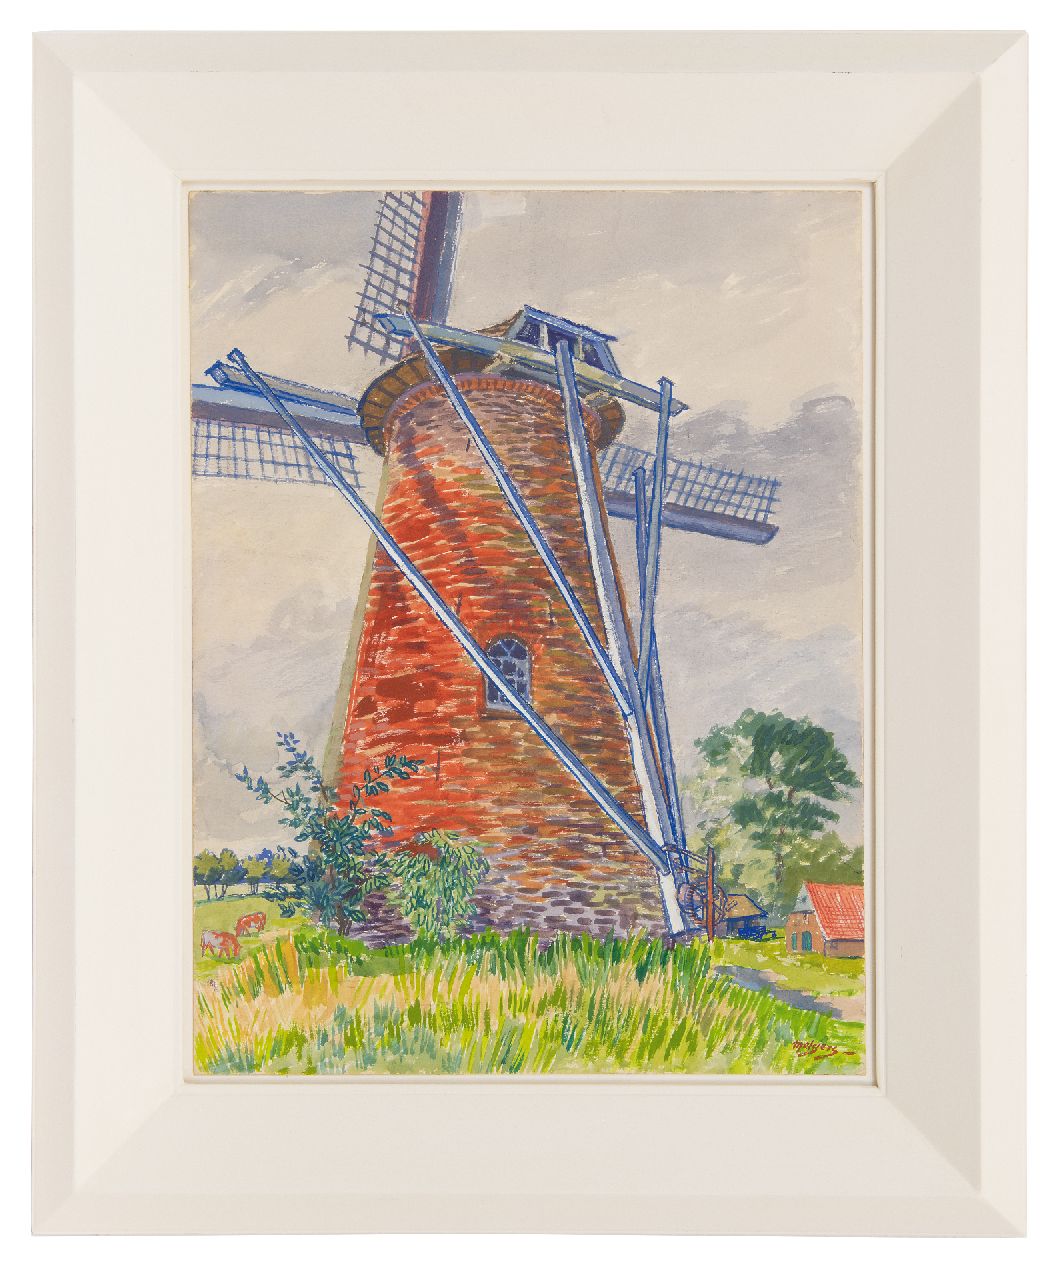 Melgers H.J.  | Hendrik Johan 'Henk' Melgers | Watercolours and drawings offered for sale | Windmill, gouache on paper 49.4 x 37.2 cm, signed l.r.